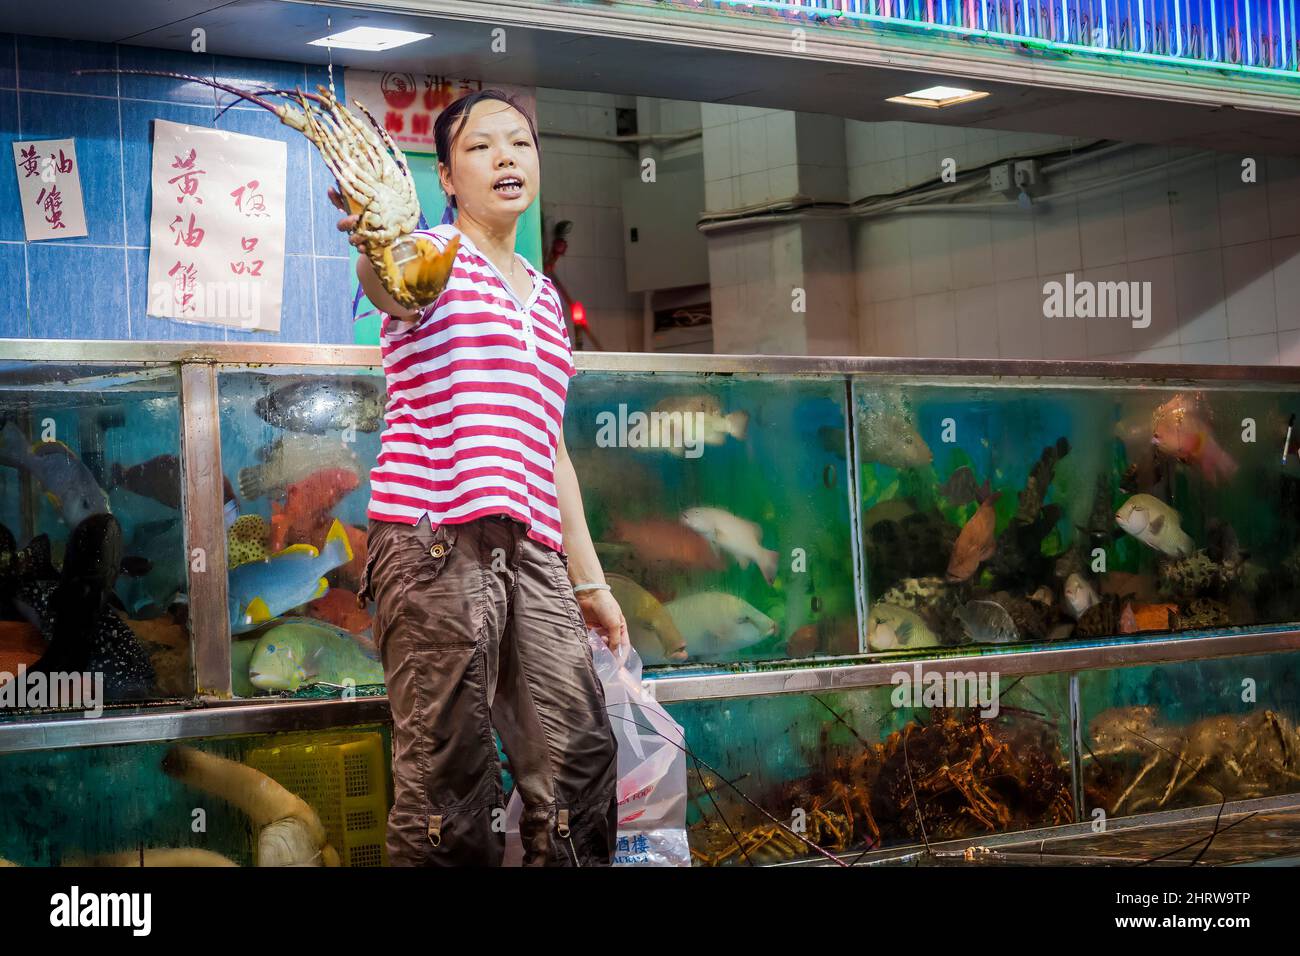 A staff member displays a lobster selected by a customer from seafood on display in tanks outside a restaurant at Sai Kung waterfront, Hong Kong Stock Photo